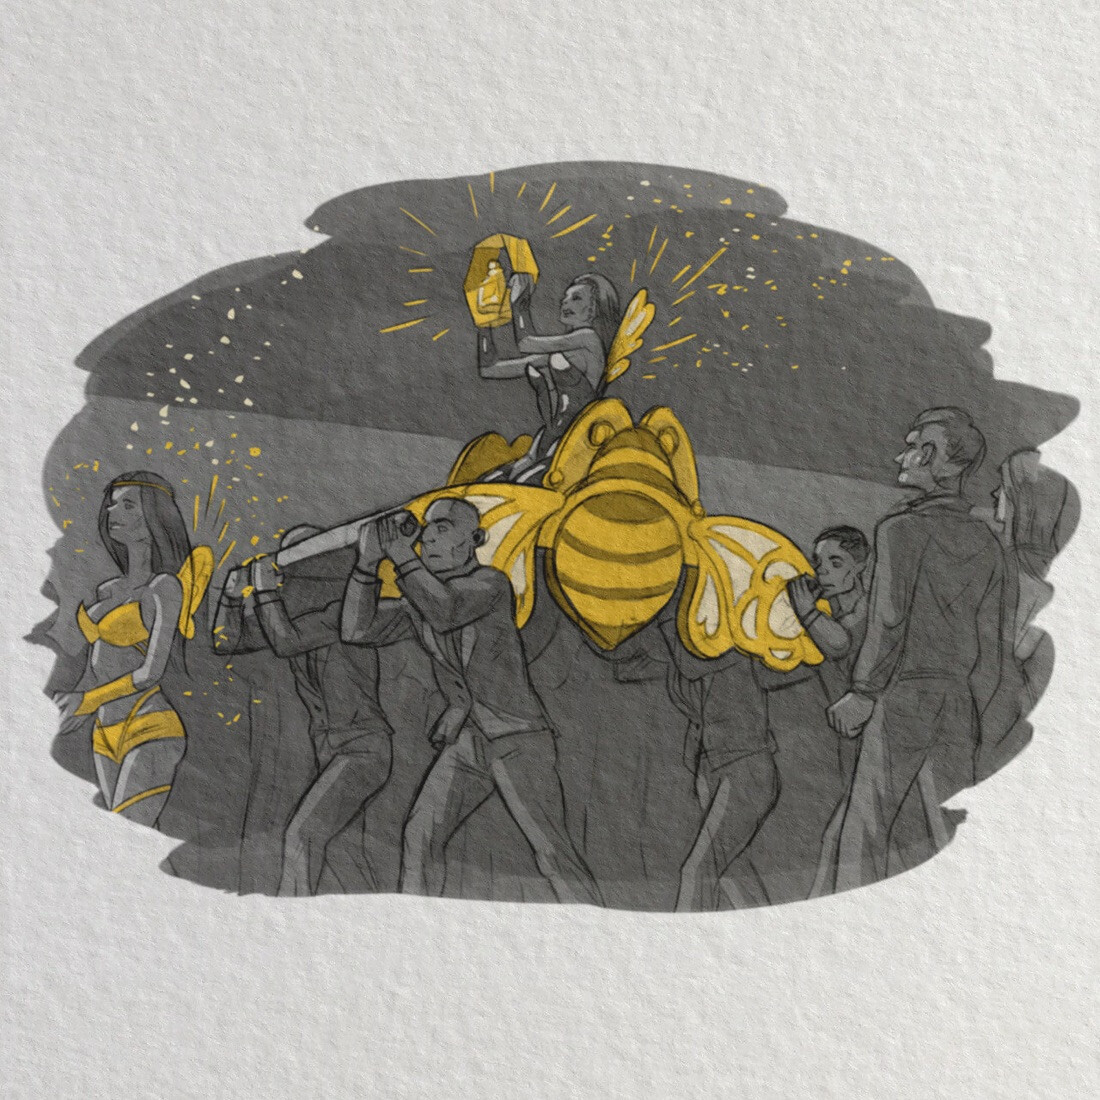 Sketch of bottle brand experience concept: a woman being carried on a platform, with details that allude to her being the Queen Bee and holding the Patron bottle in a gold hexagonal case.